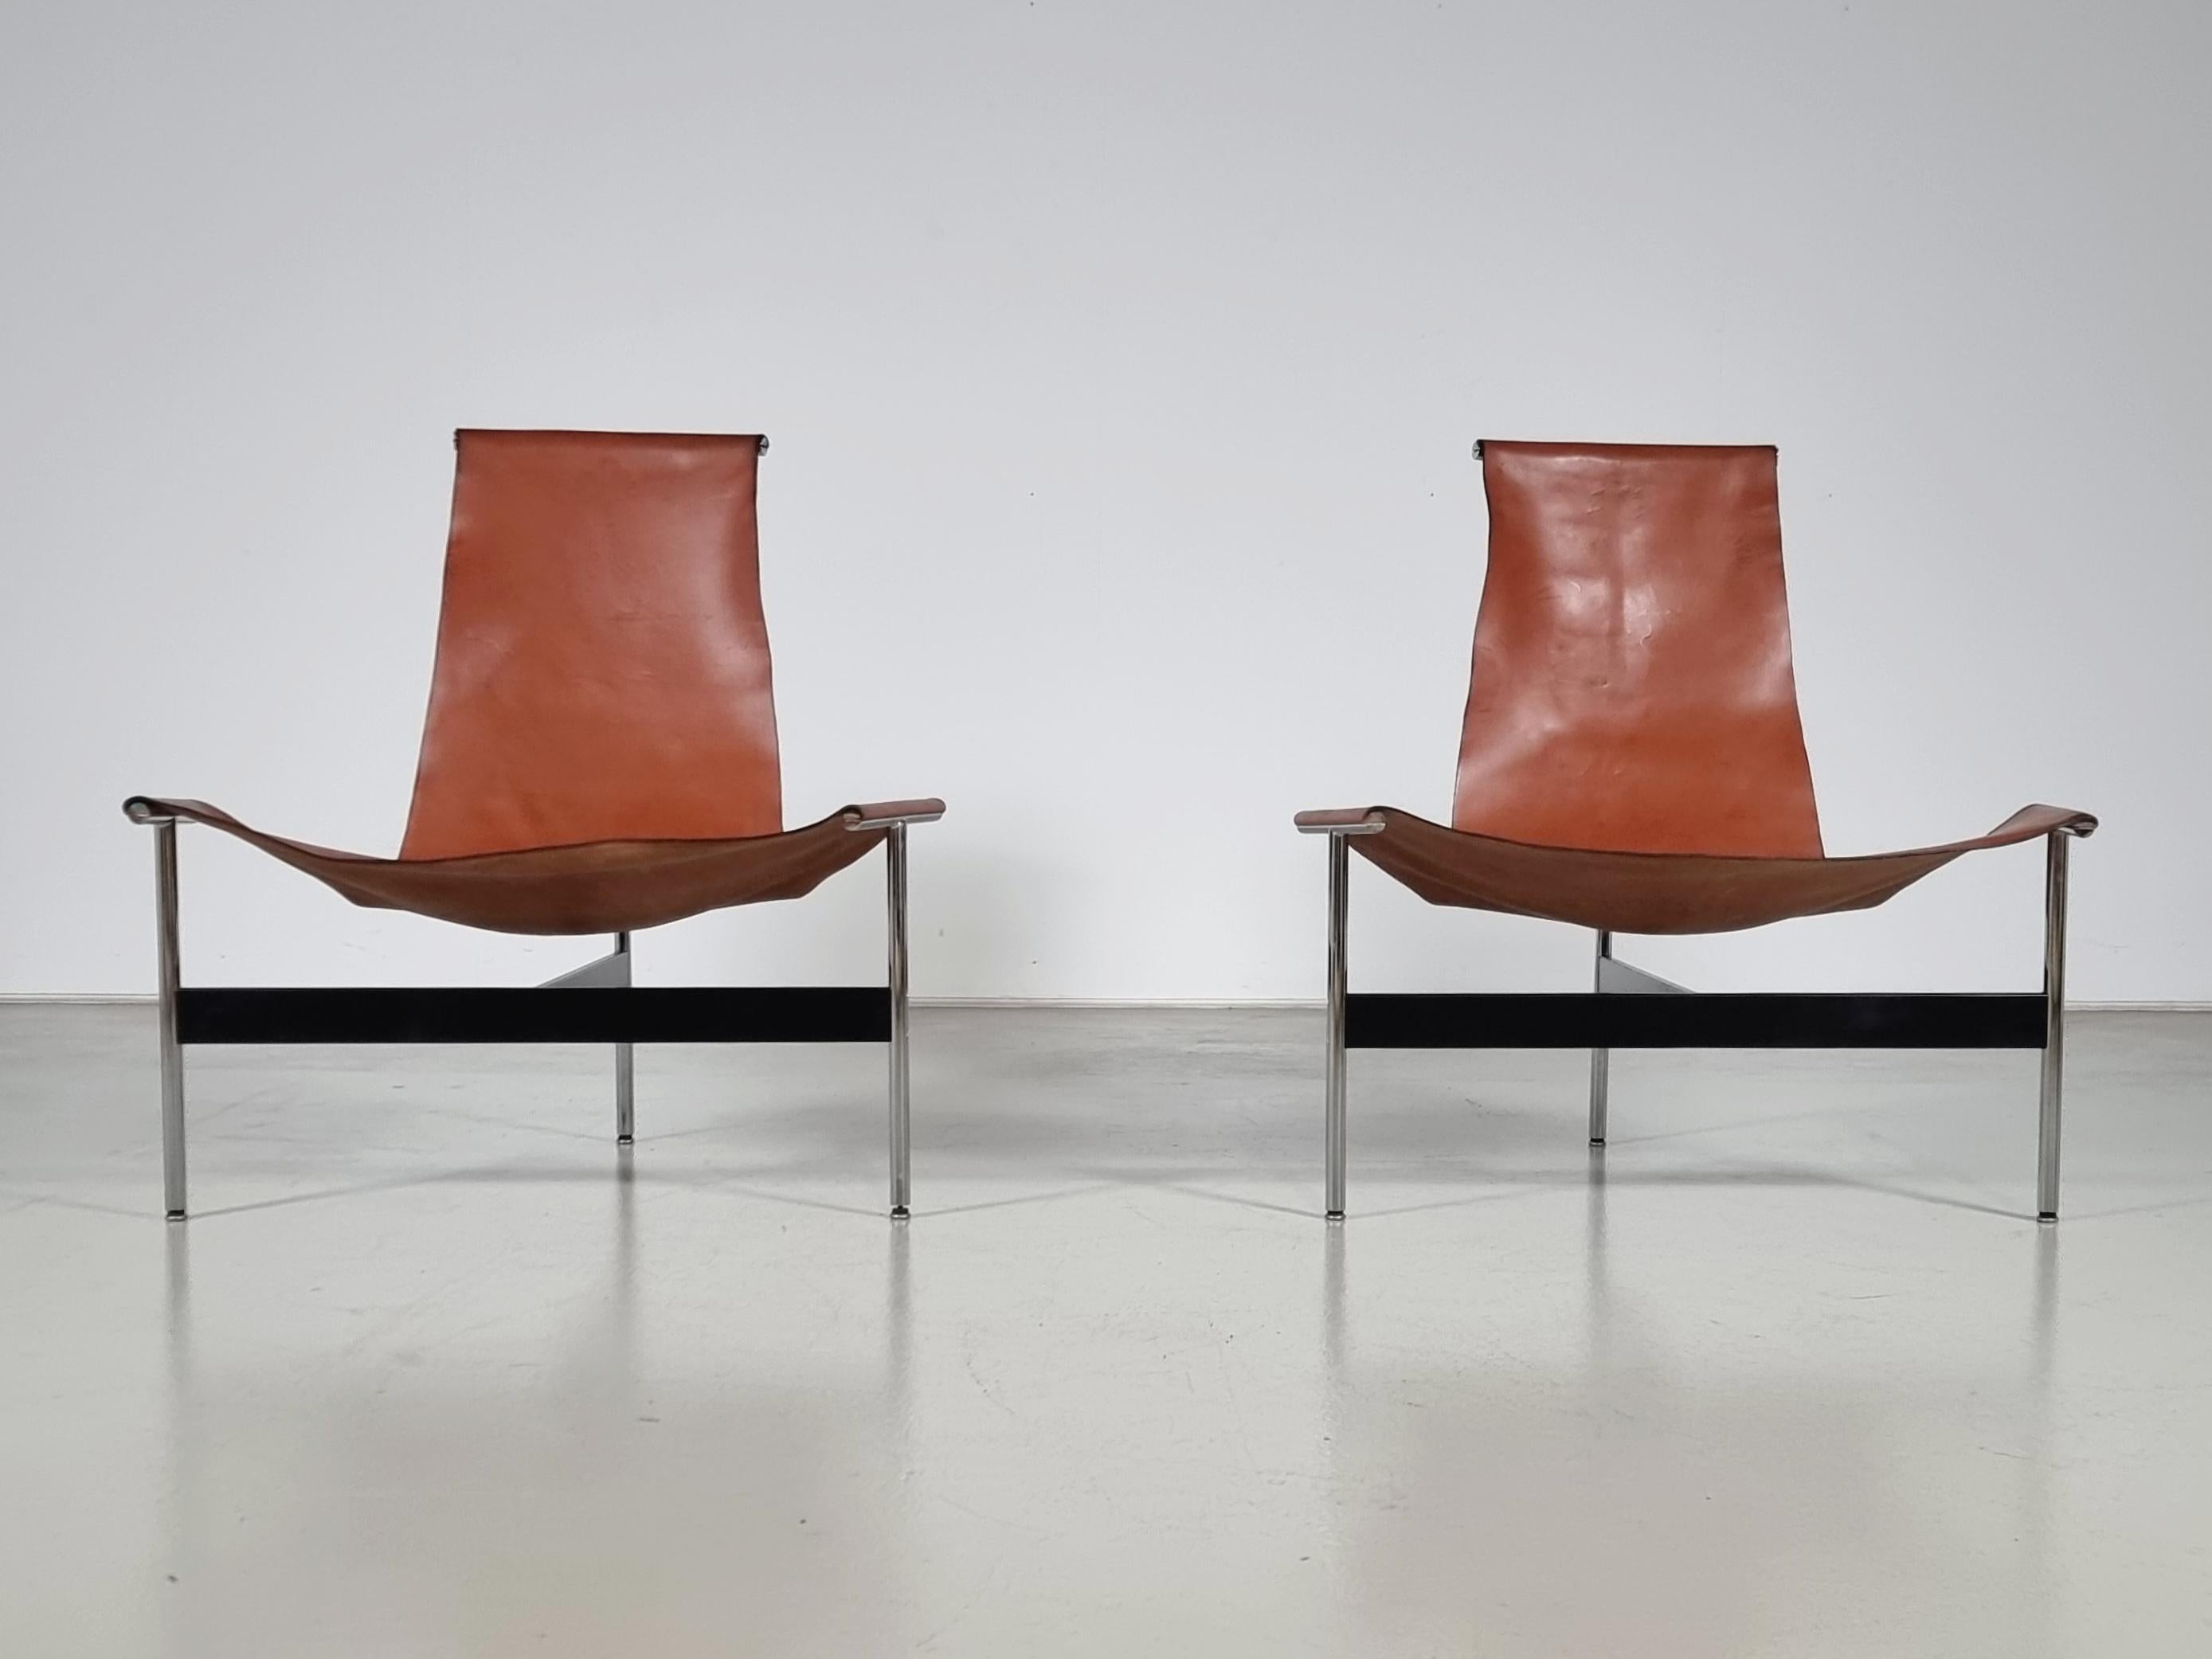 Rare lounge versions of the 3LC chairs, better known as T-chairs. Chrome-plated and enameled steel with original cognac leather sling, designed by William Katavolos, Ross Littell, and Douglas Kelley. By Laverne International's 